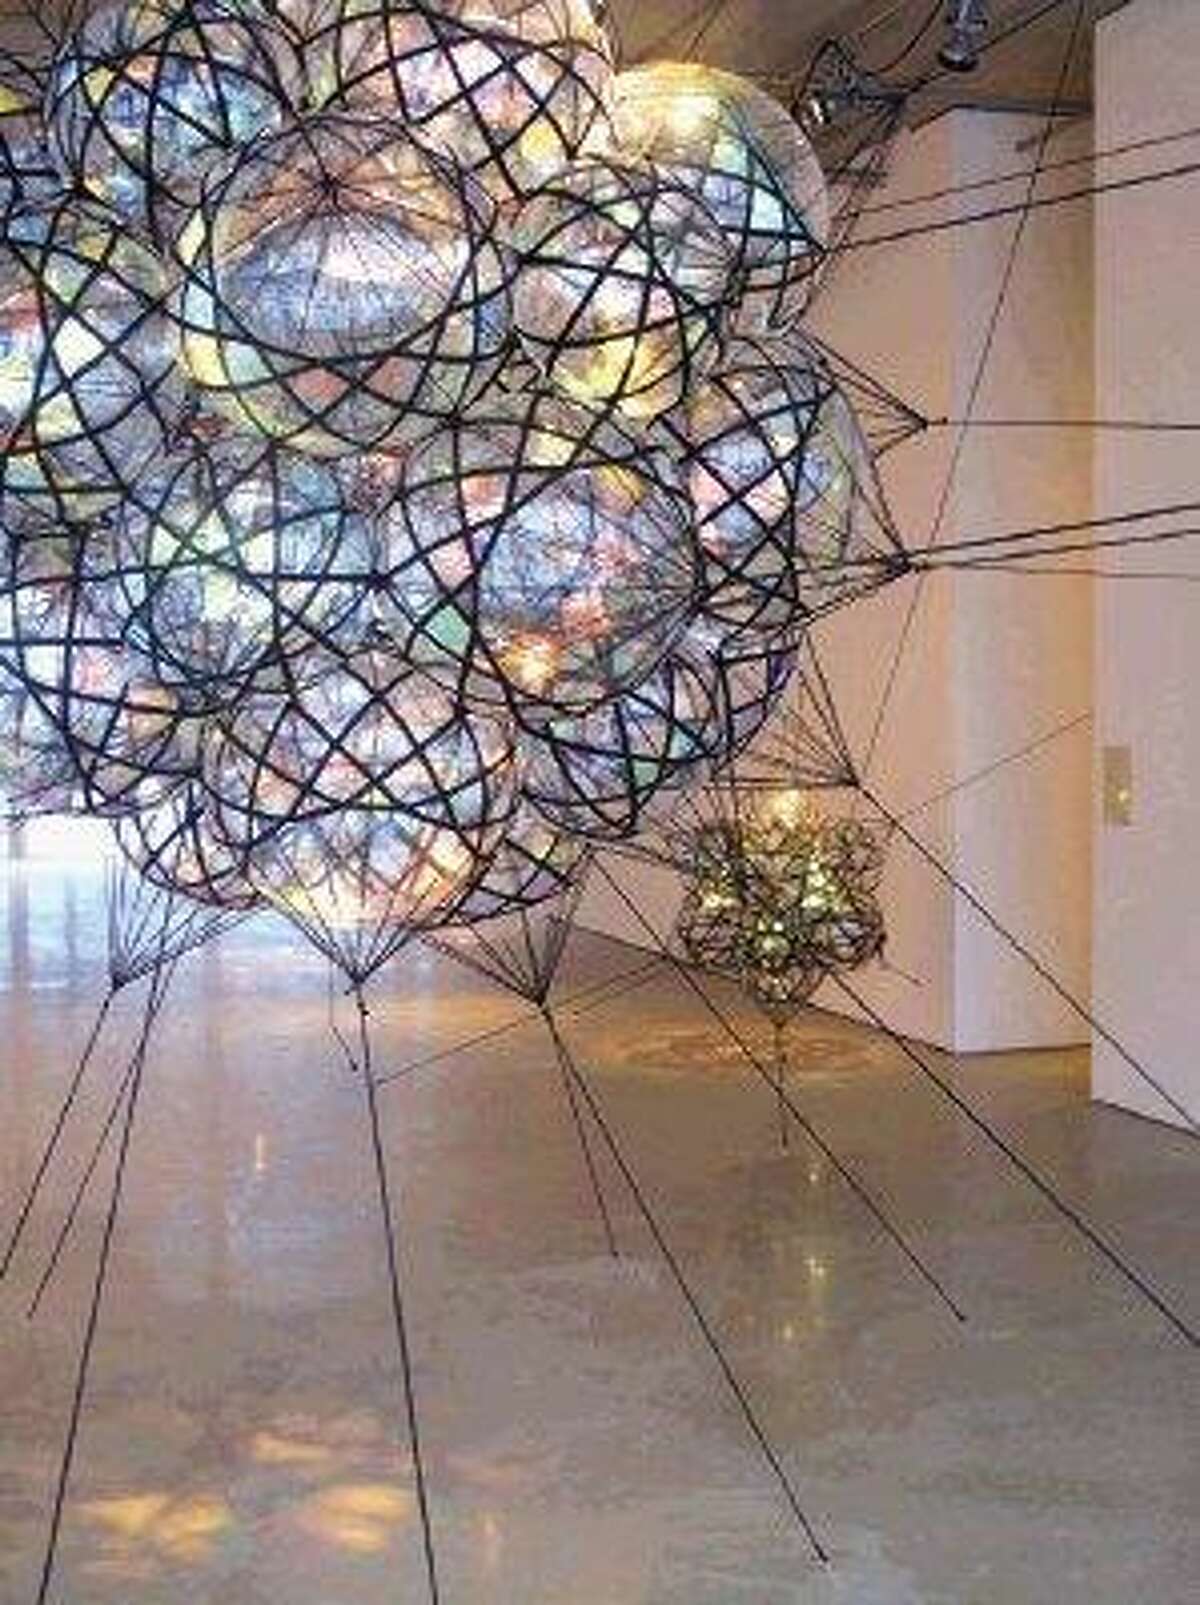 The artwork of Tomas Saraceno is currently on display at the Blaffer Gallery in Houston.